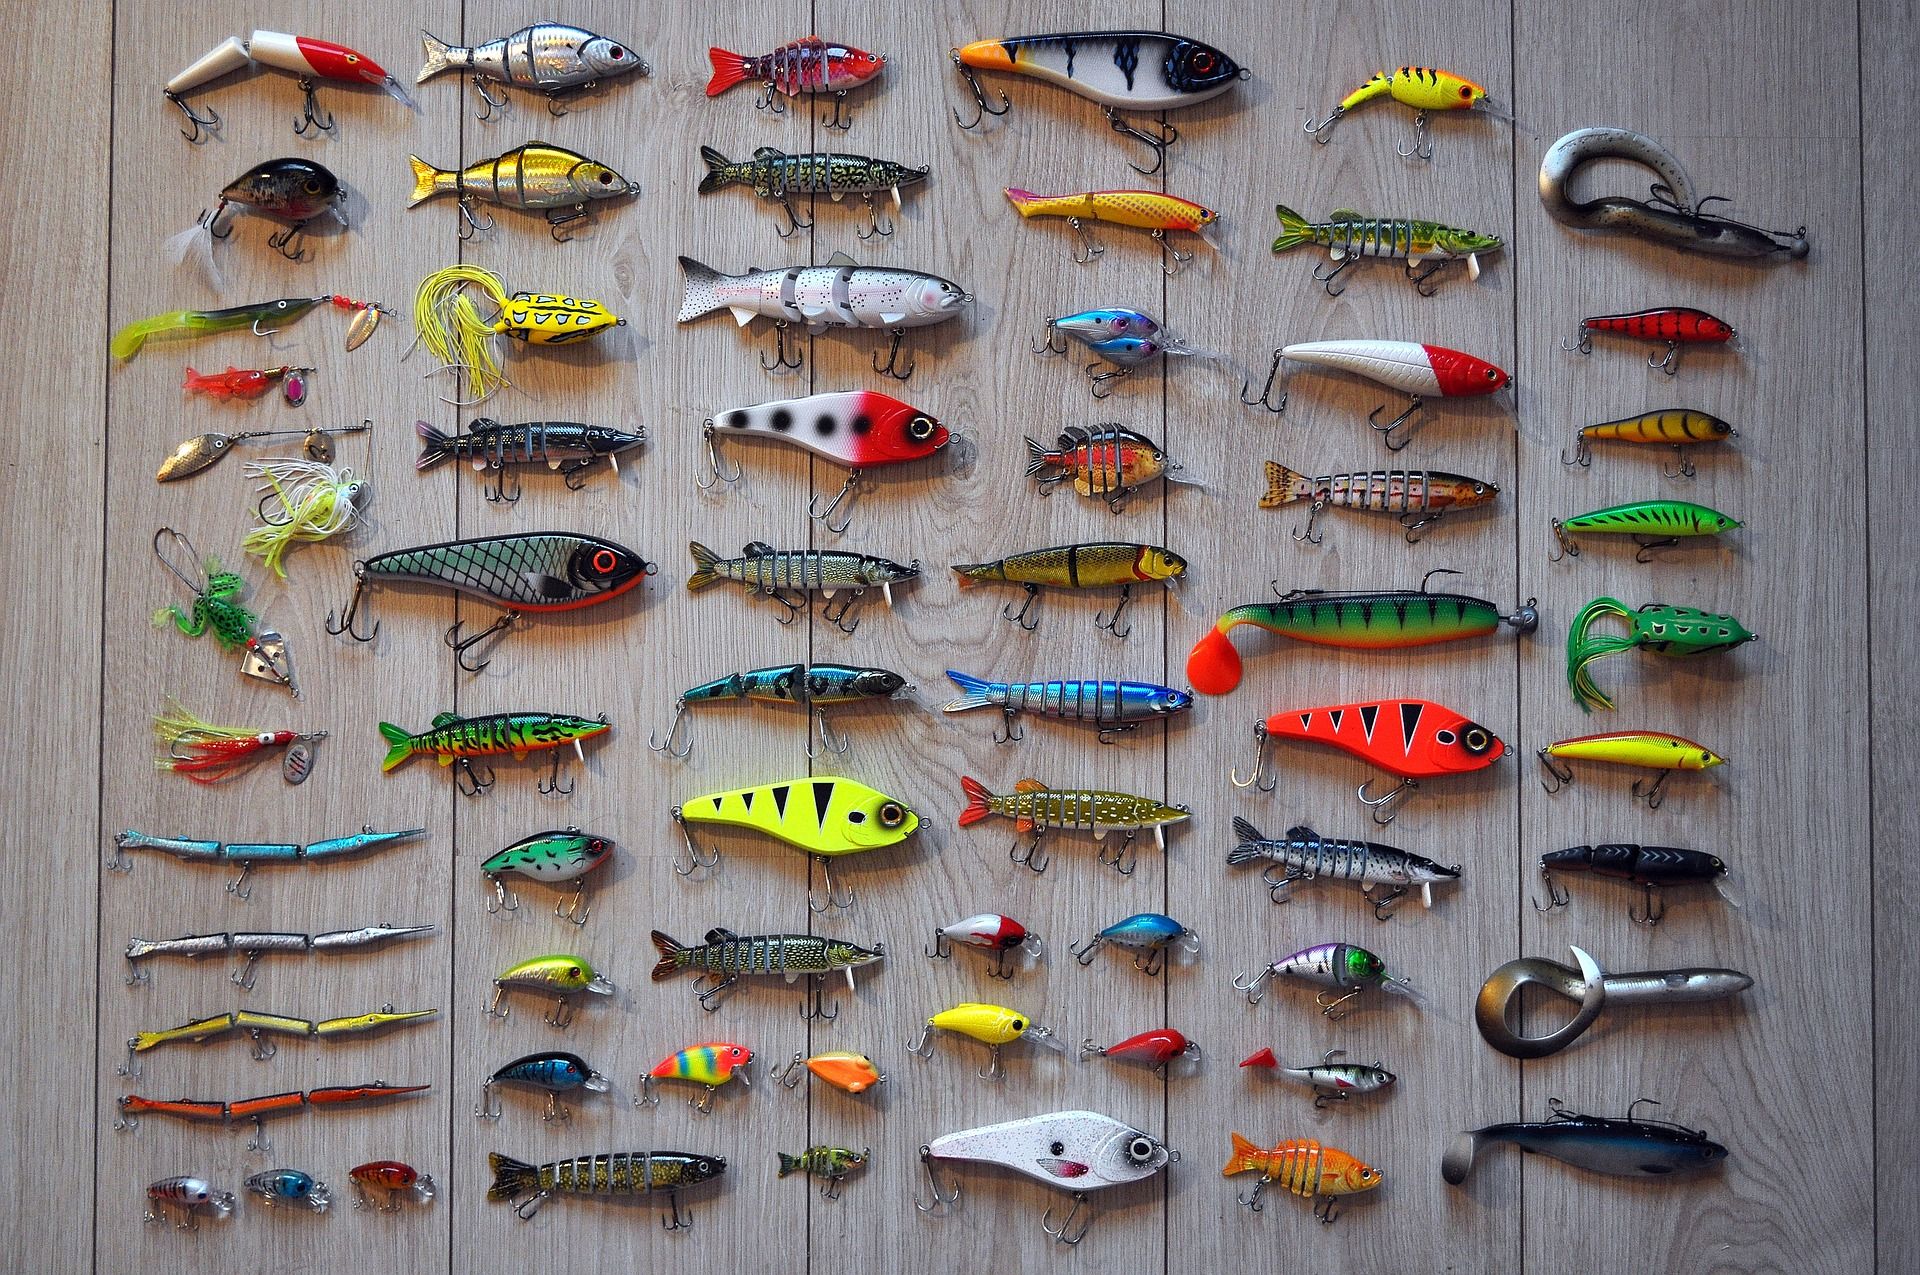 PLUSINNO Fishing Lures Baits Tackle Including India